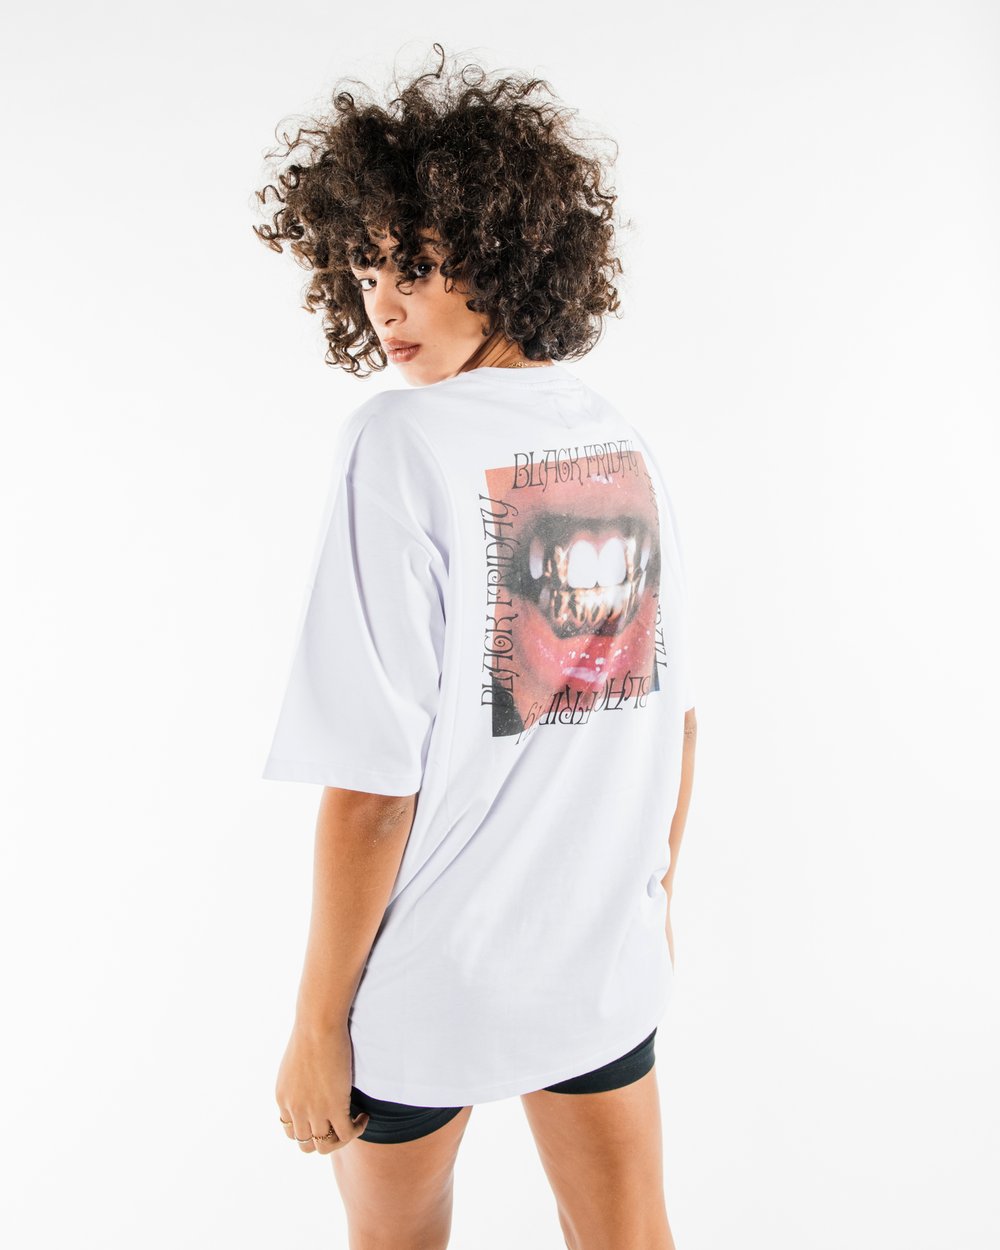 GRILLZ T-SHIRT BFD 017